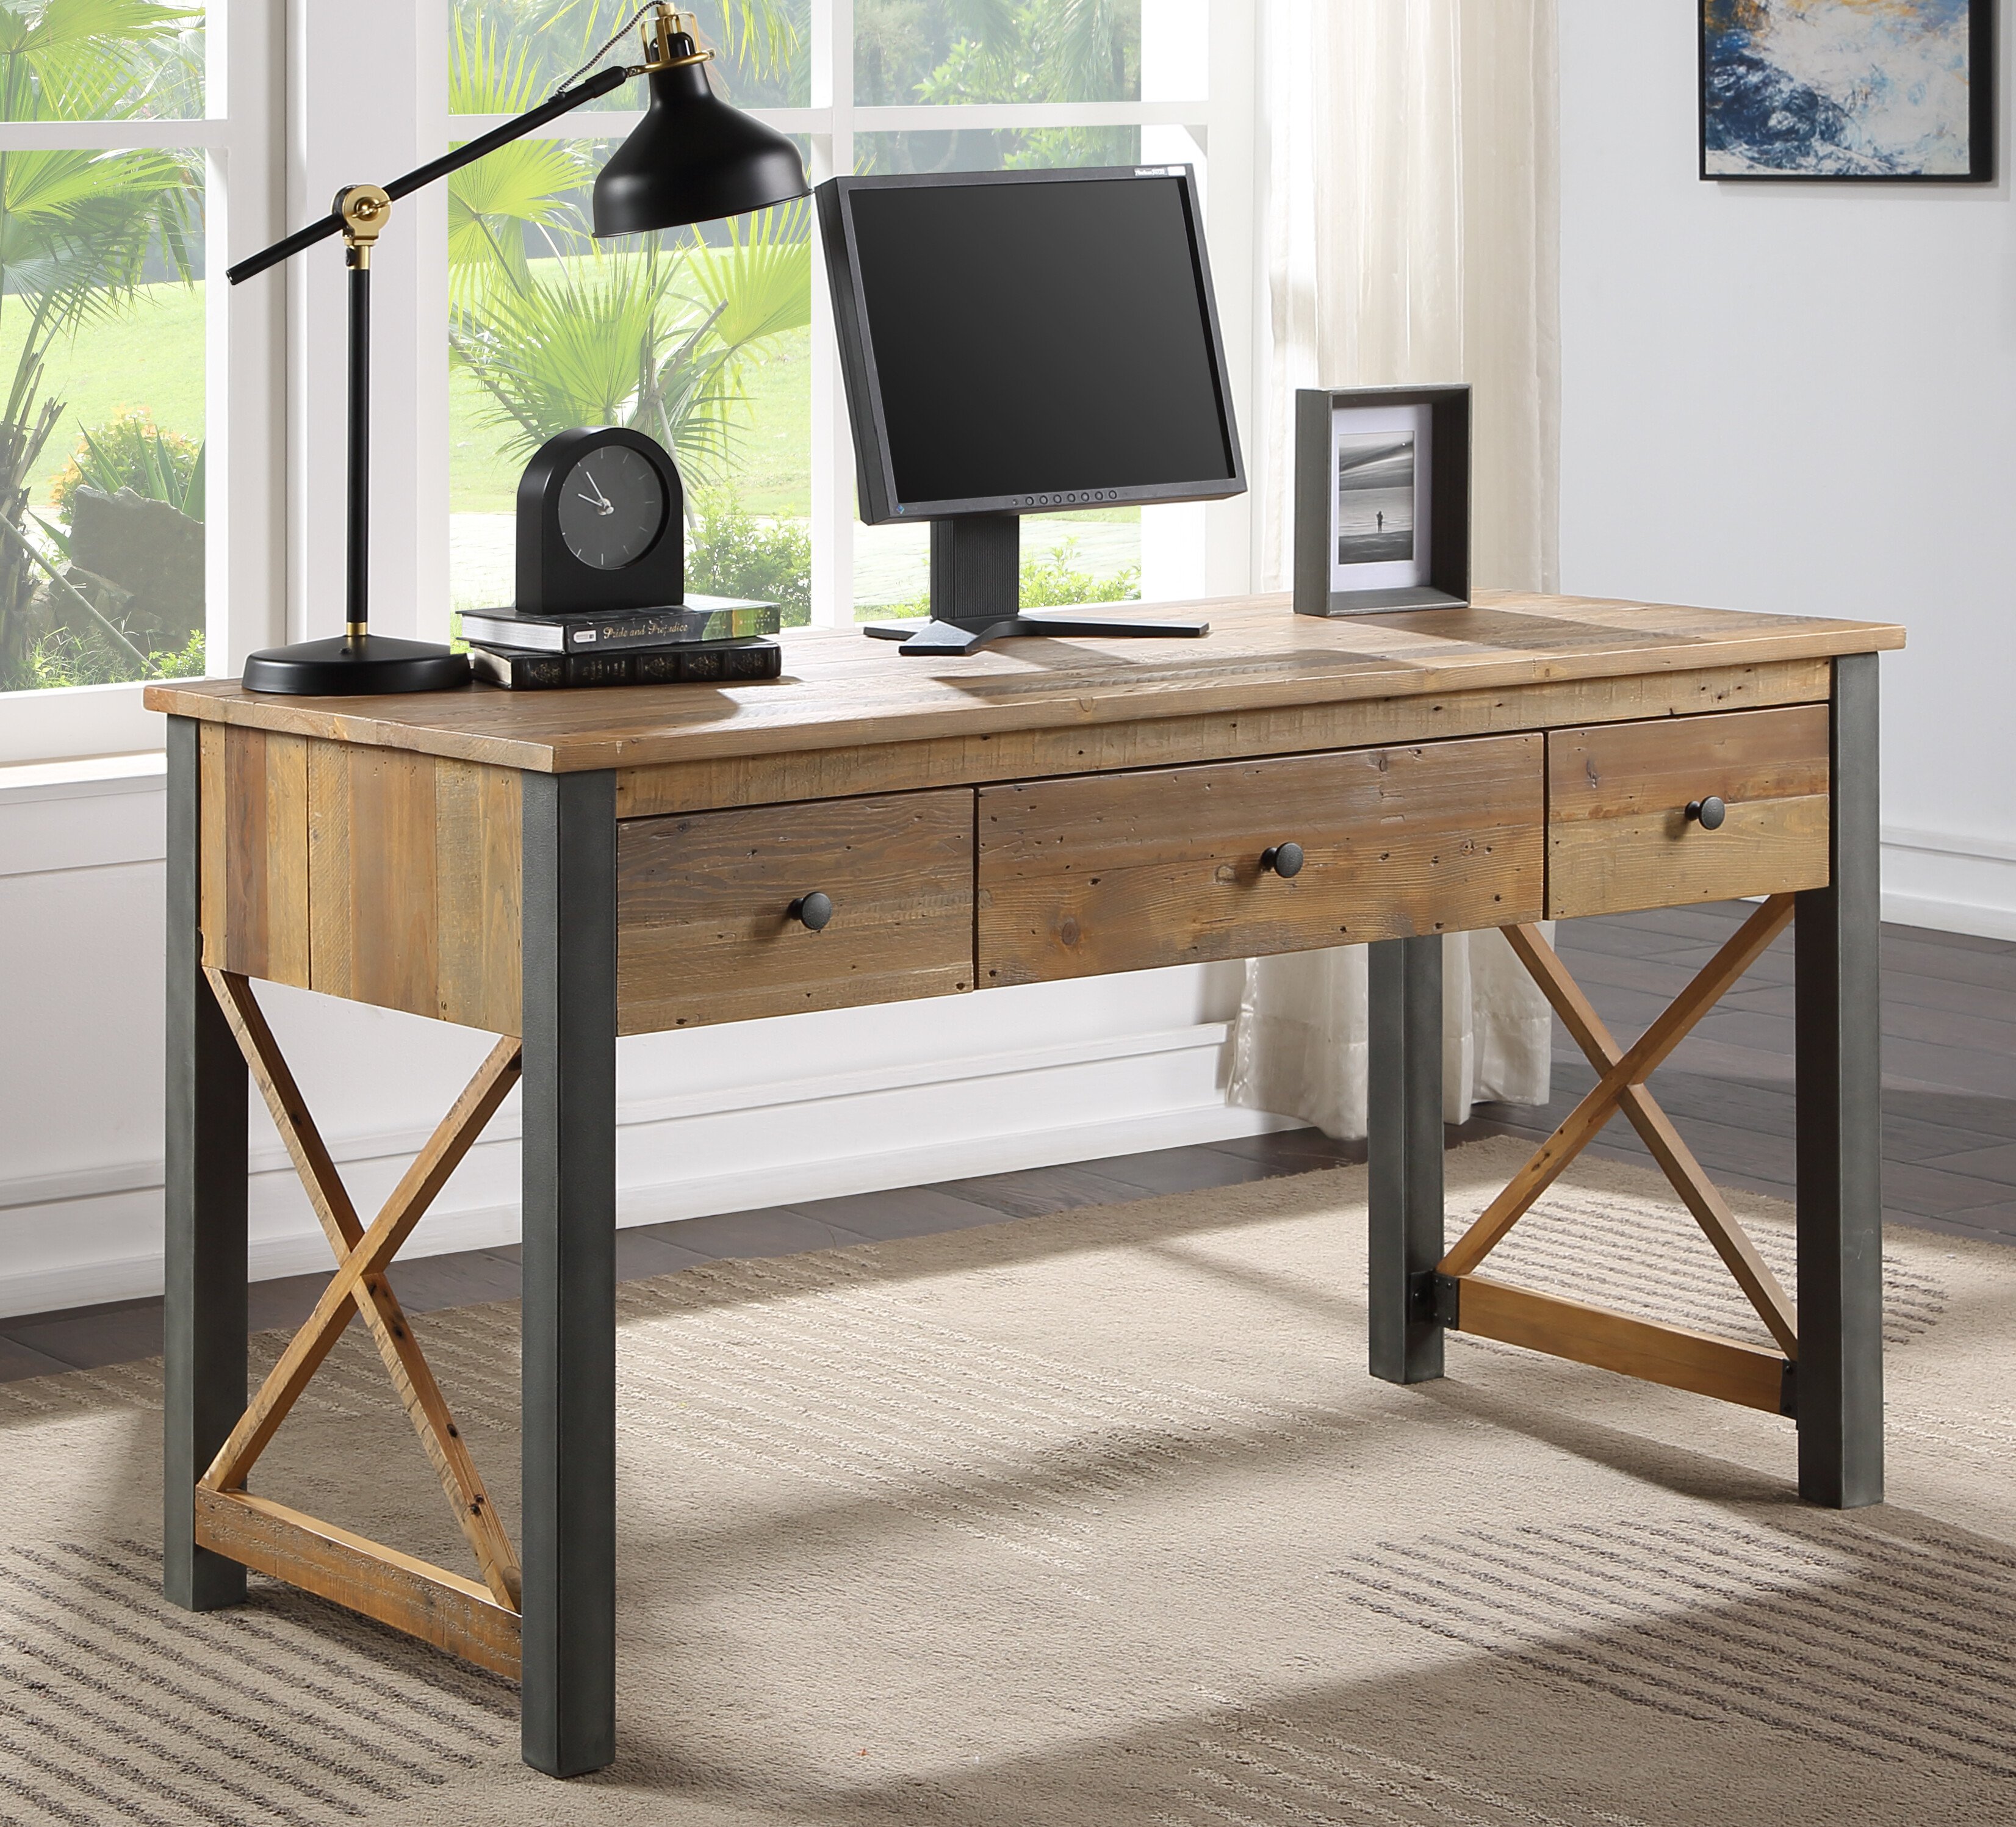 https://www.office-furniture-direct.co.uk/Cache/Images/VPR06A-1-1.jpg